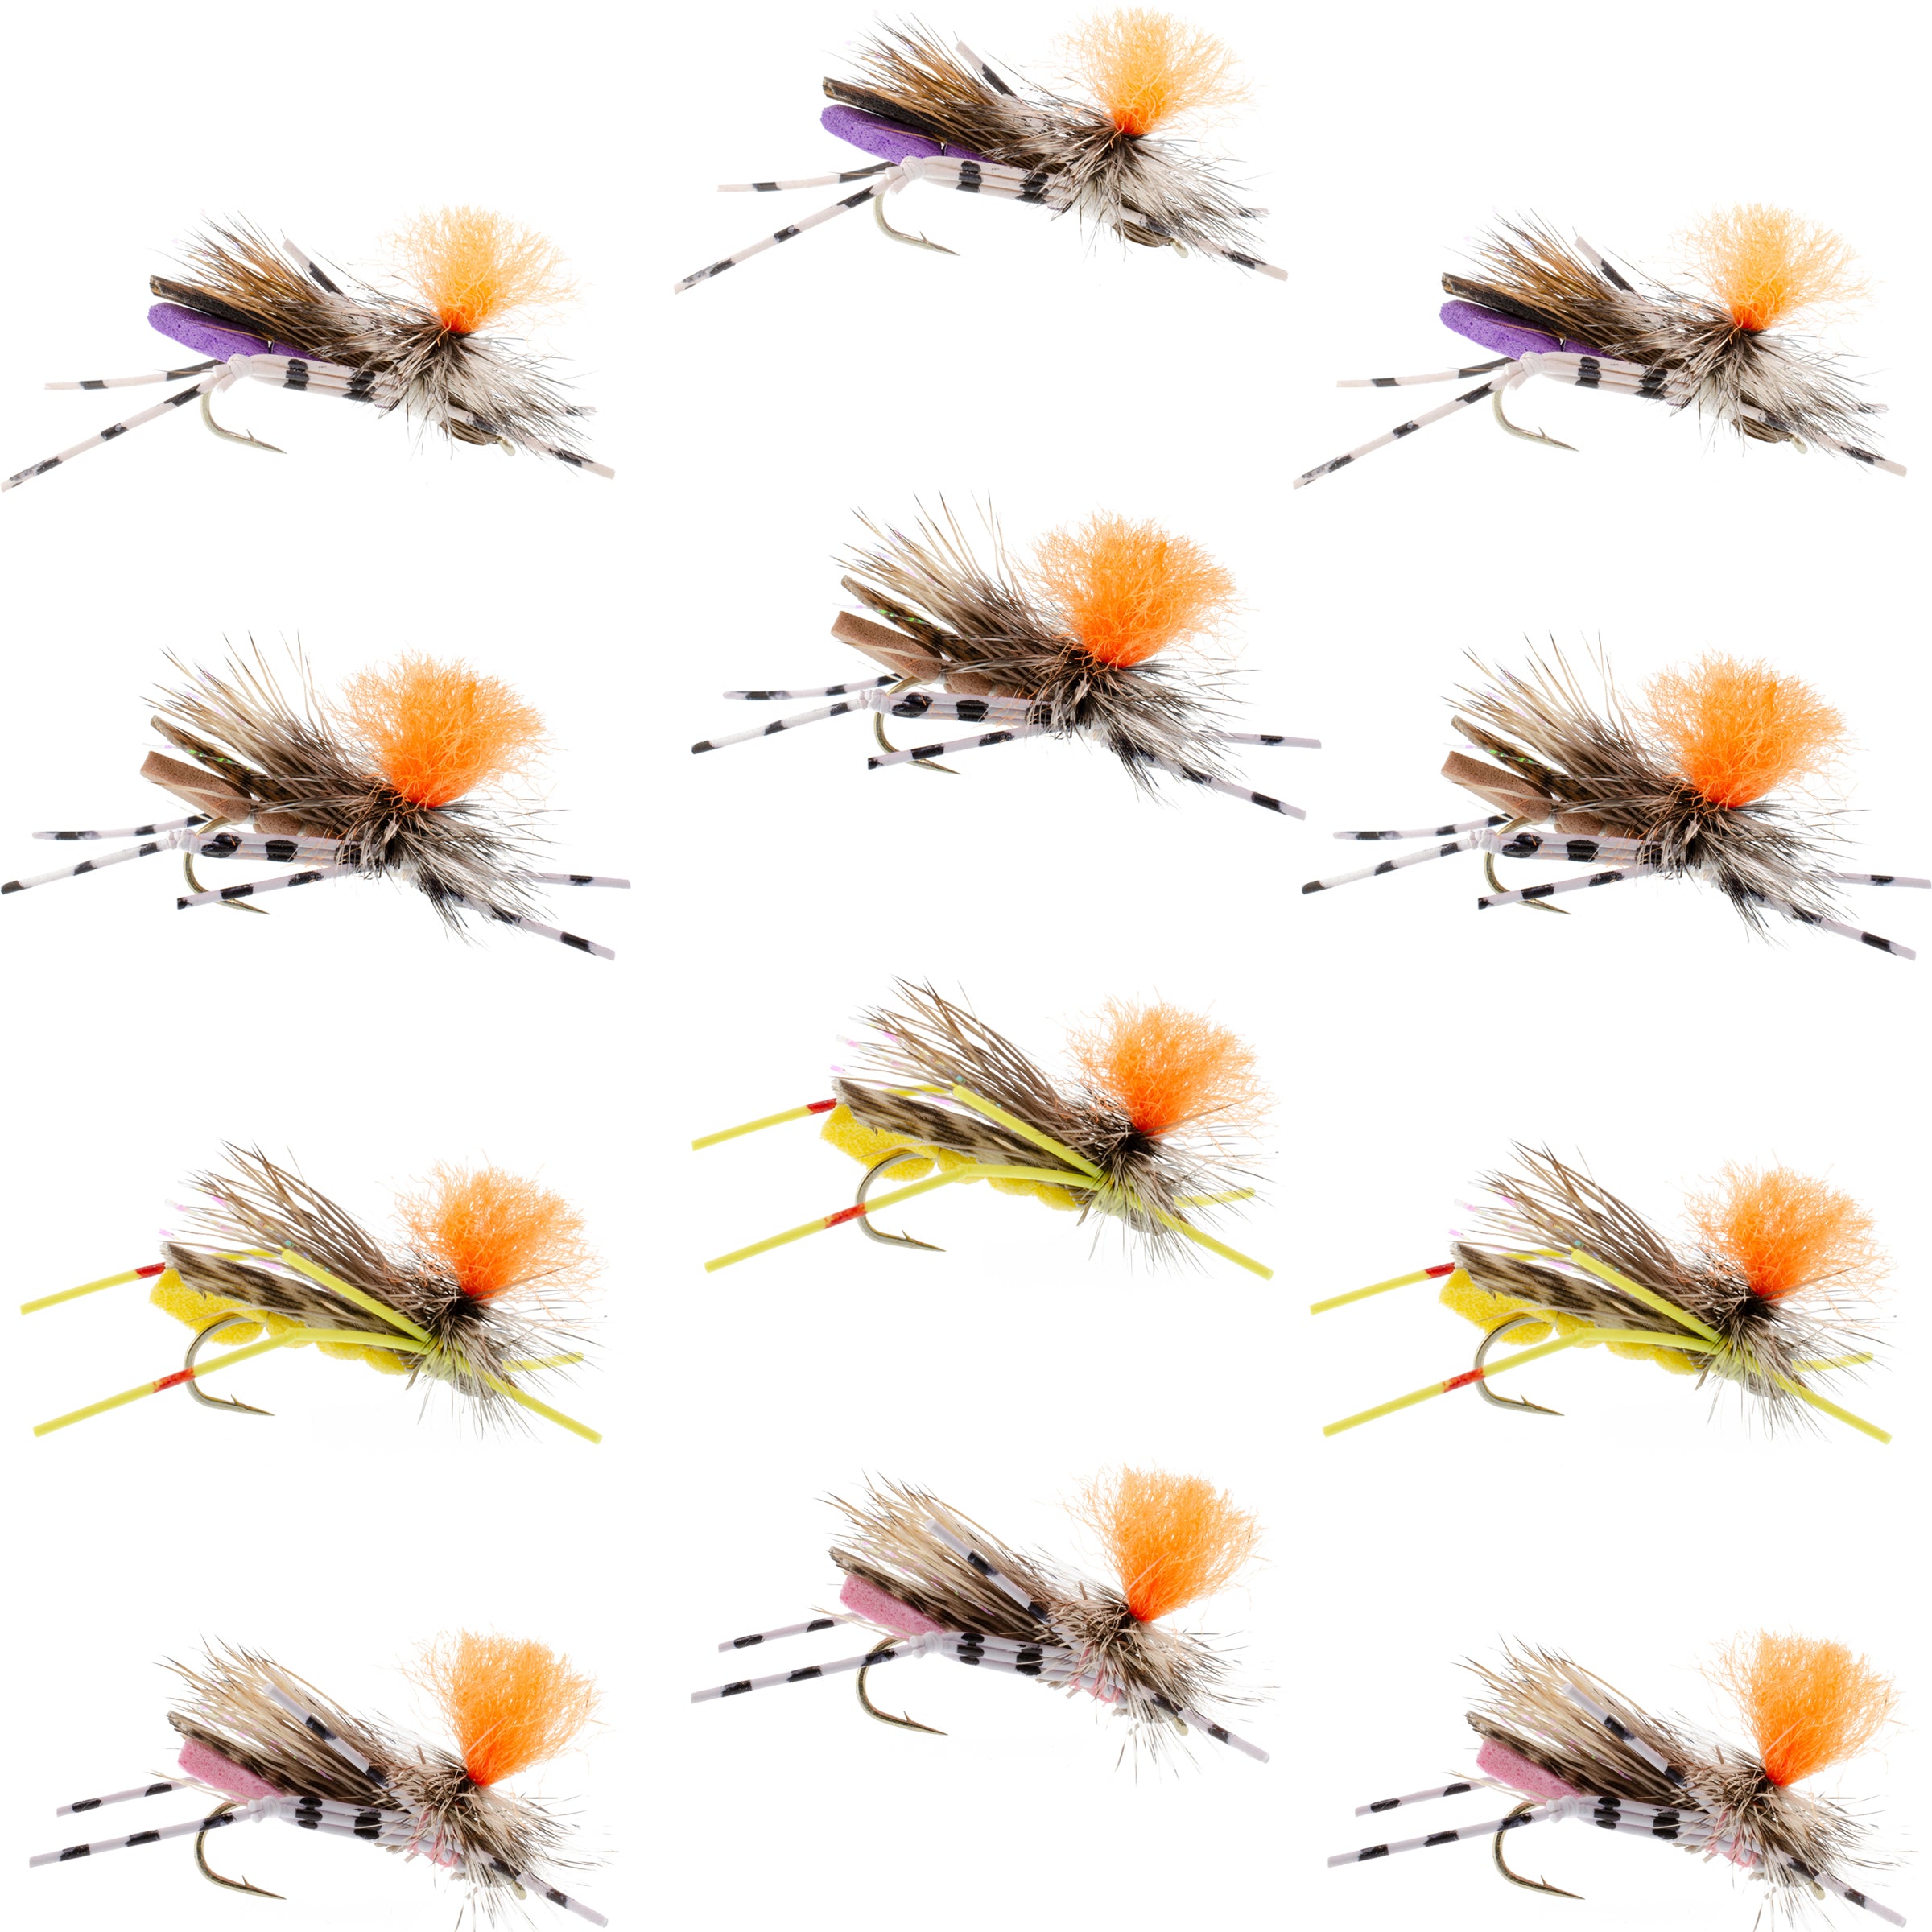  Basics Collection - Foam Hoppers Dry Fly Assortment - 10 Dry  Fishing Grasshopper Flies - 5 Patterns - Hook Size 10